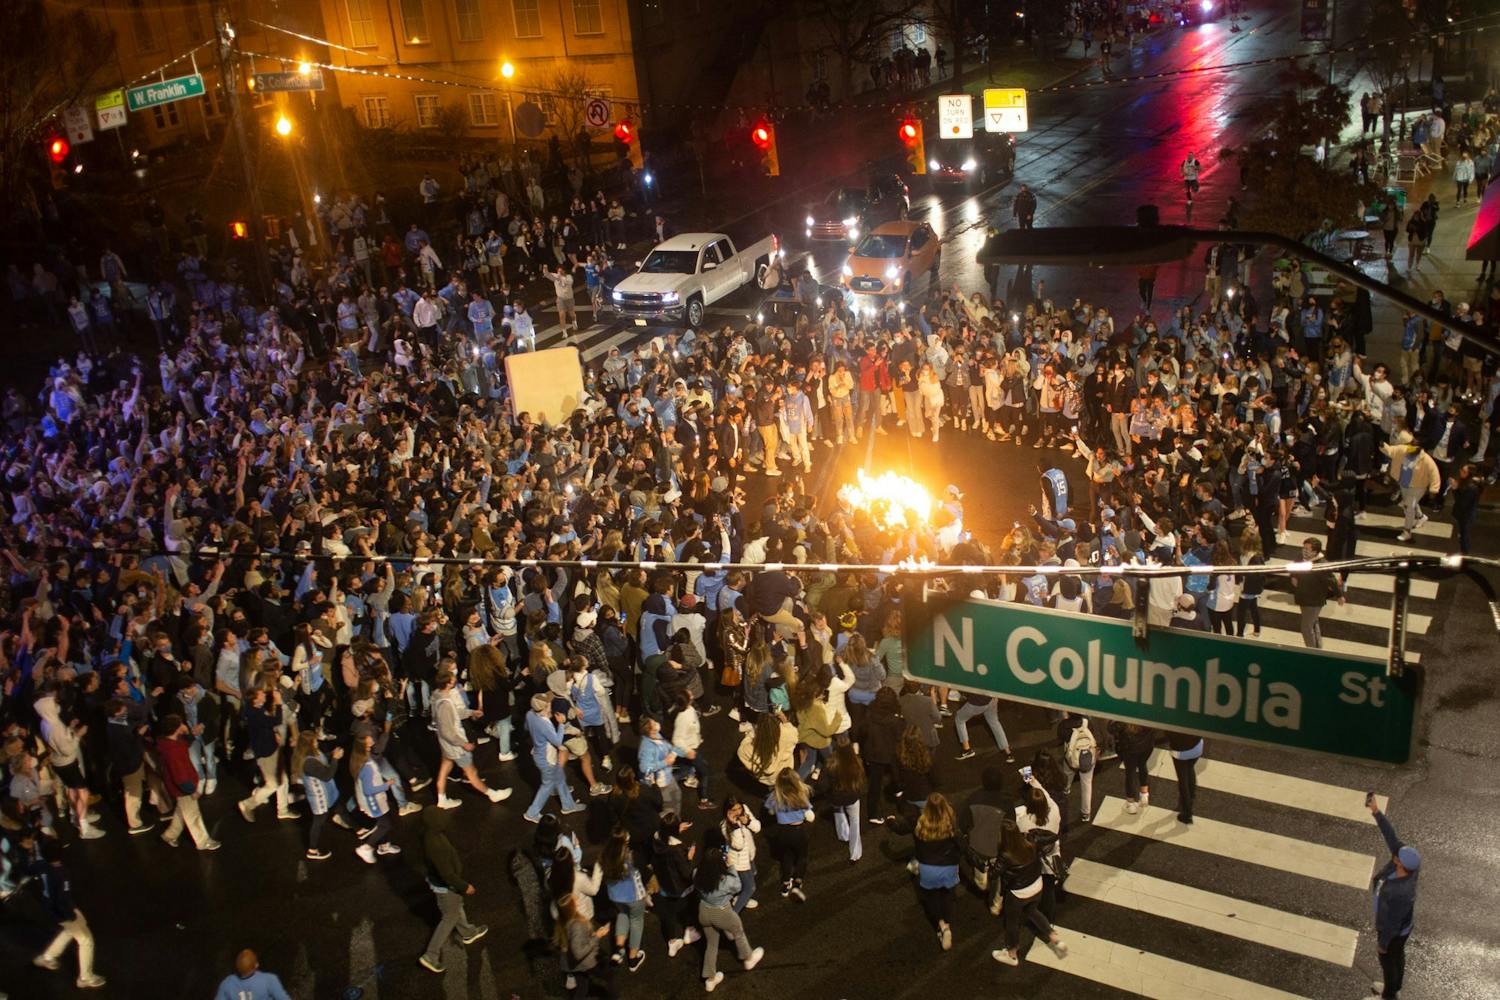 Students Rush Franklin Street After Duke Win